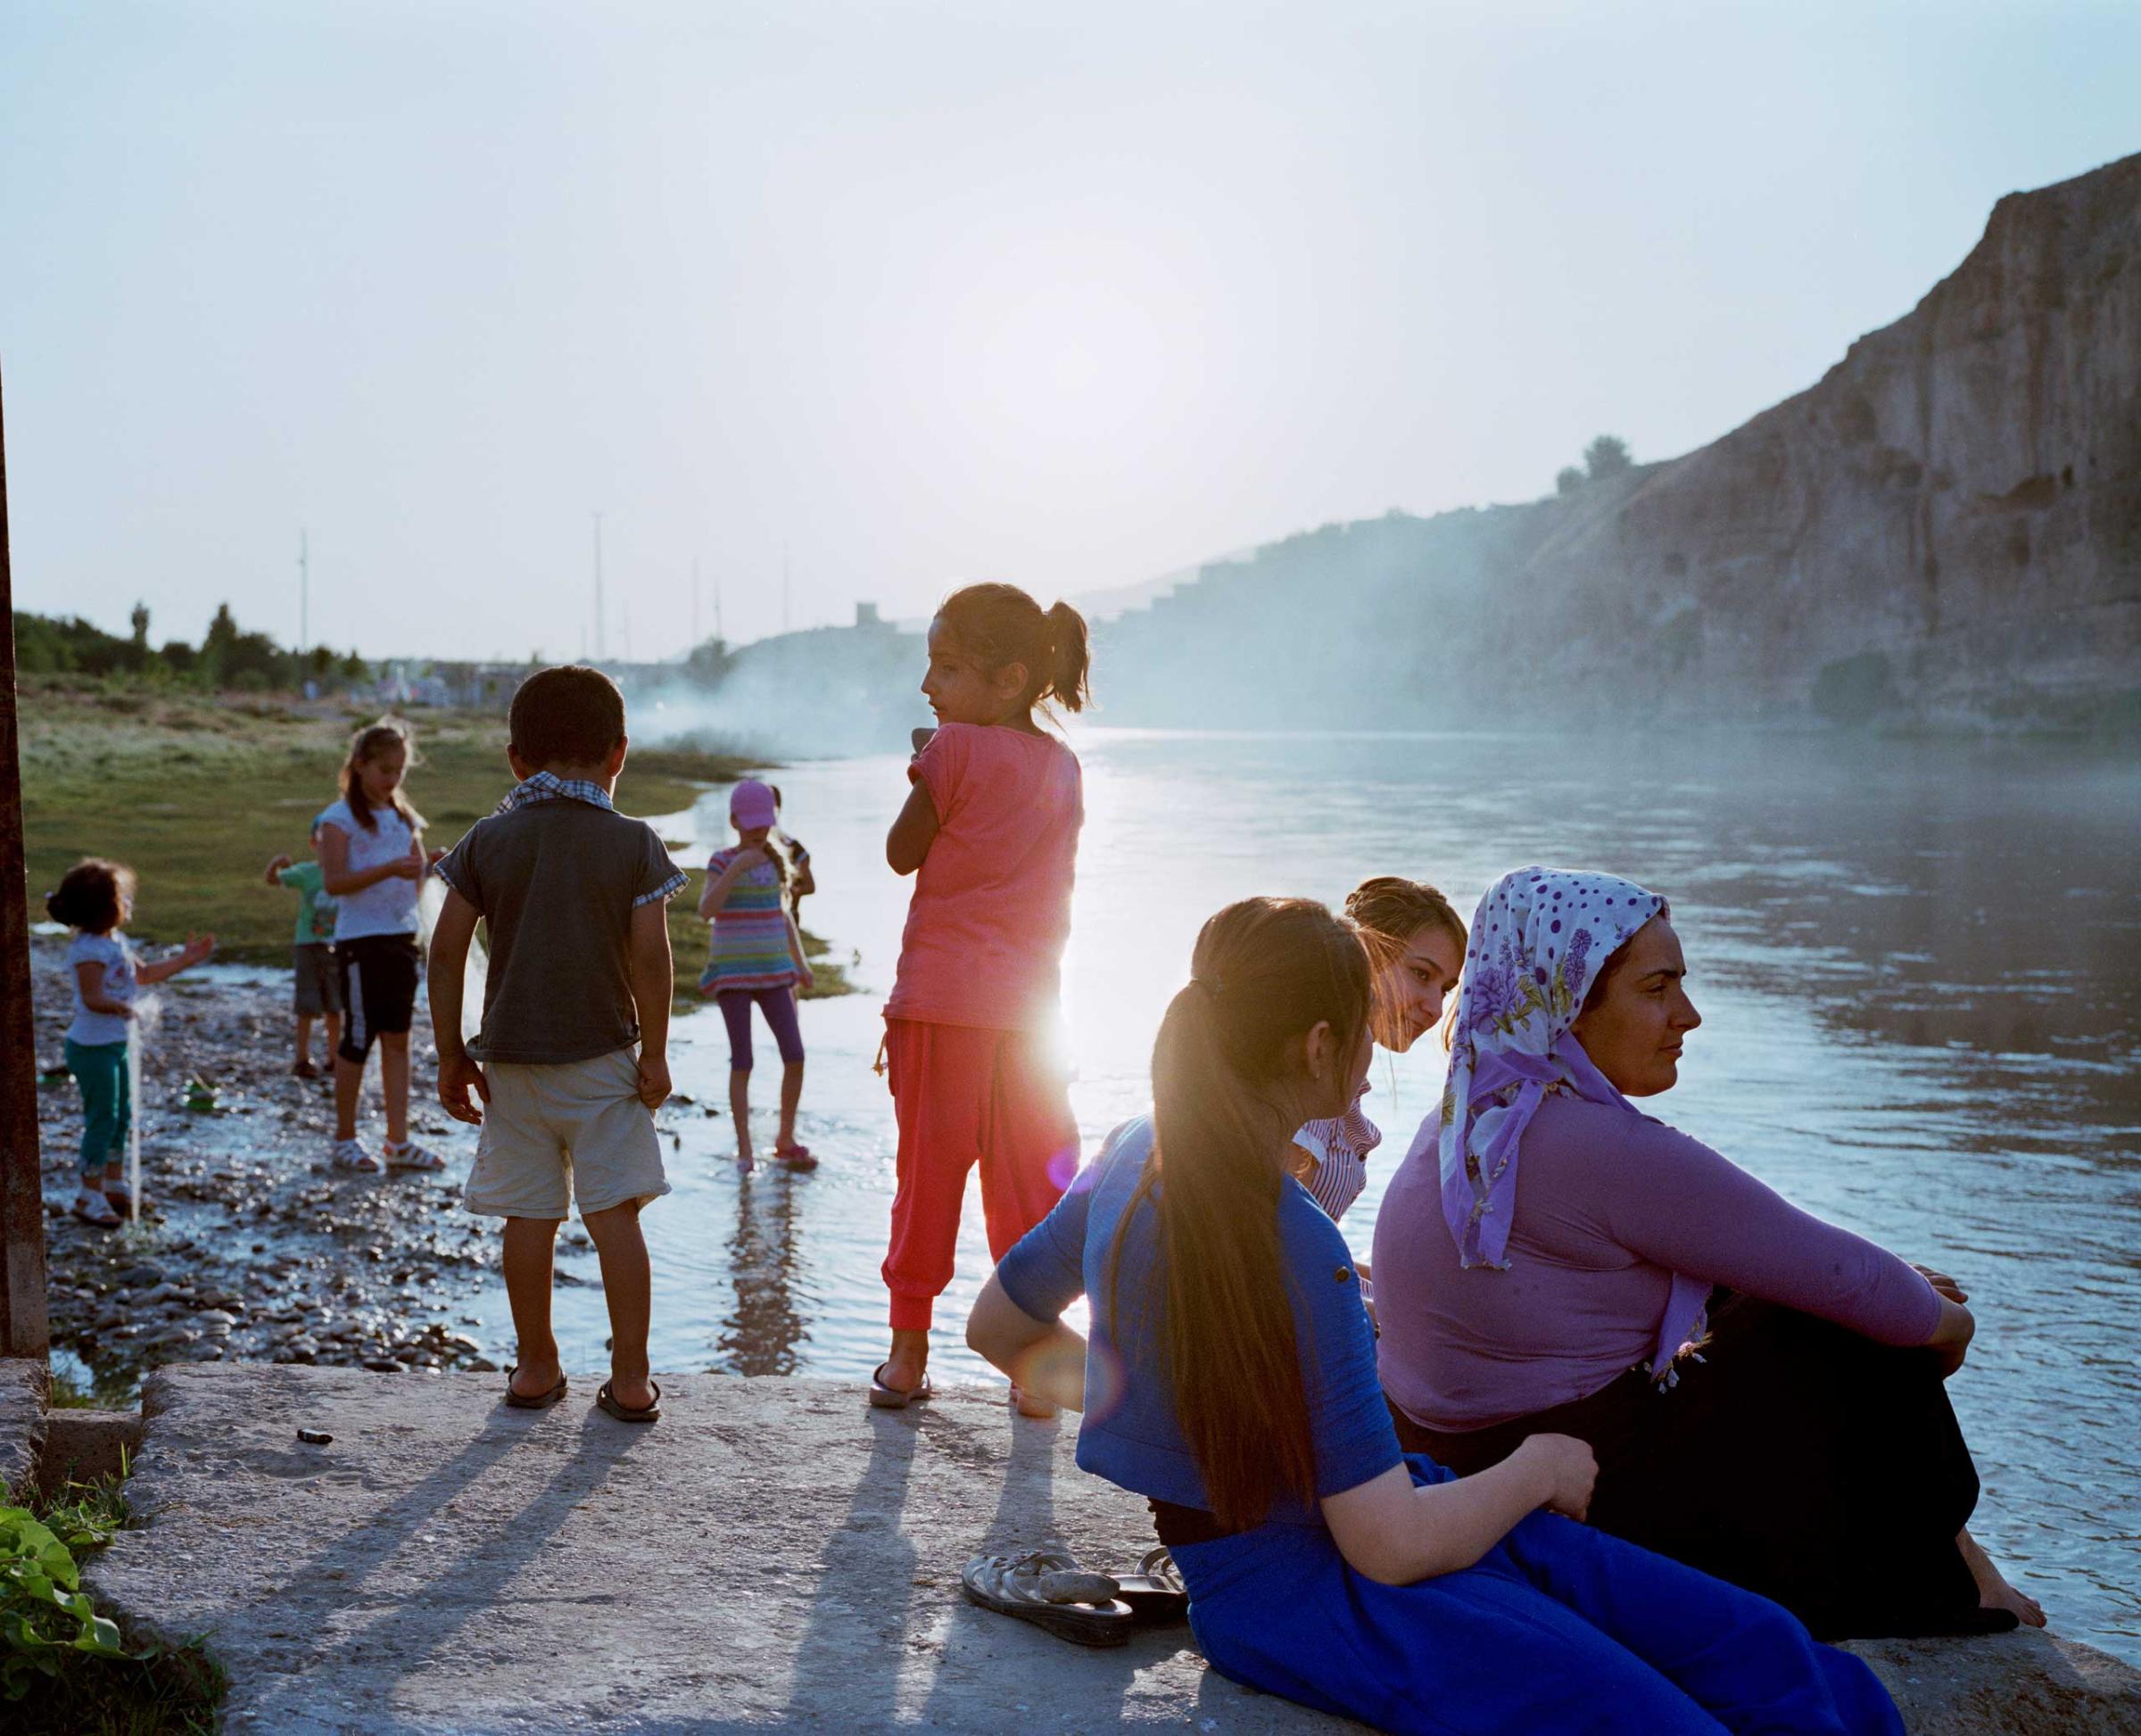 The Ilisu dam project due in 2014 will flood 80% of the ancient monuments of Hasankeyf along with 52 other villages and 15 small towns. By 2016, it will destroy 400 kilometers of the Tigris’s ecosystem. Children playing by the banks of the Tigris river. The river is predominant in the life of the inhabitants of the region of Hasankeyf, Turkey.